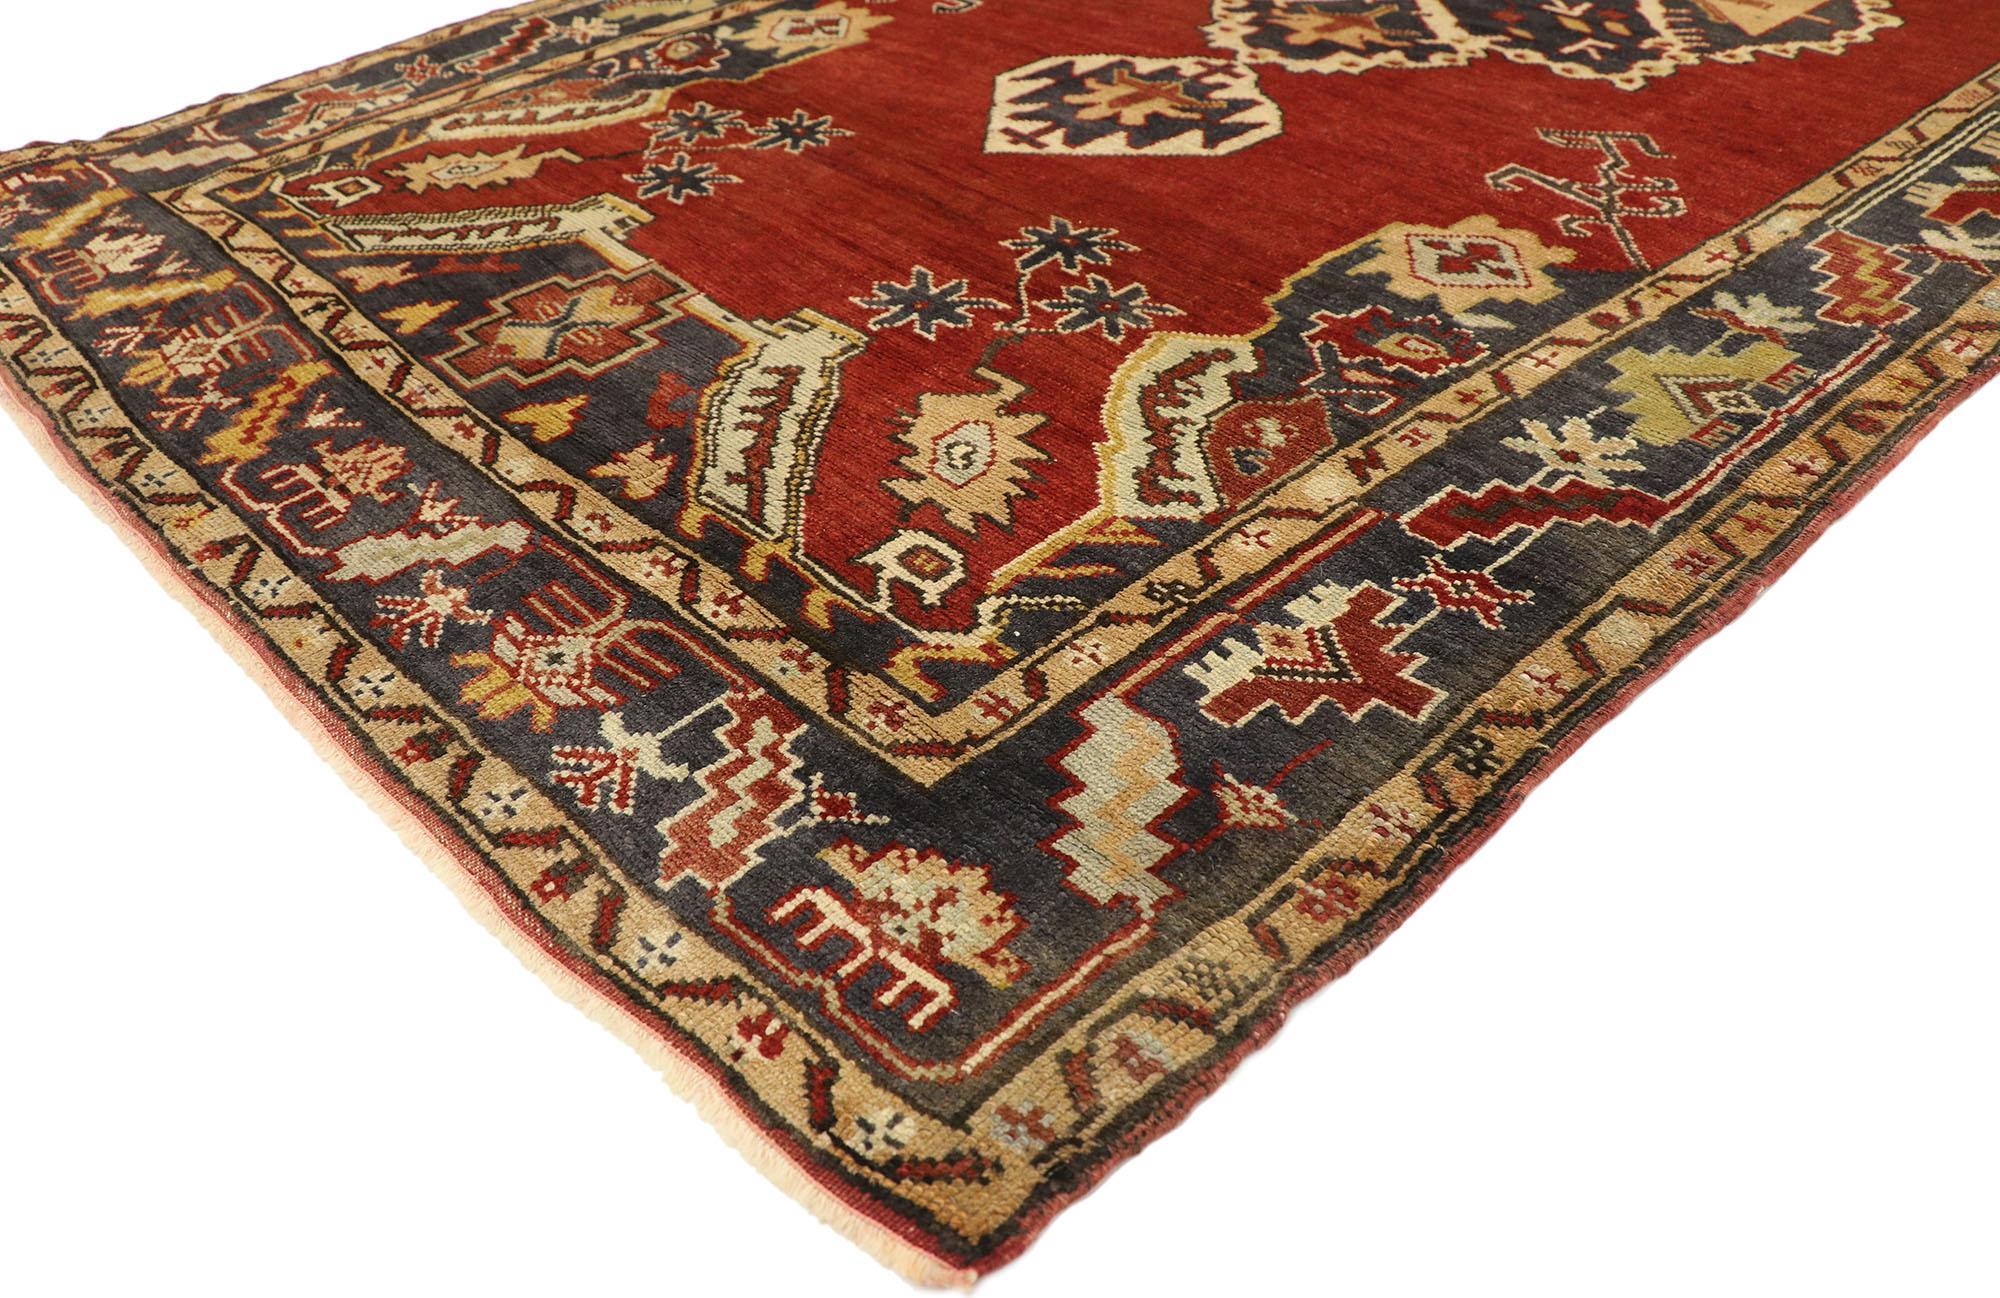 73738, vintage Turkish Oushak carpet runner with Jacobean Tudor style. Jacobean style meets timeless Anatolian tradition this hand knotted wool vintage Turkish Oushak runner. The abrashed ruby red field features two large scale cusped medallions